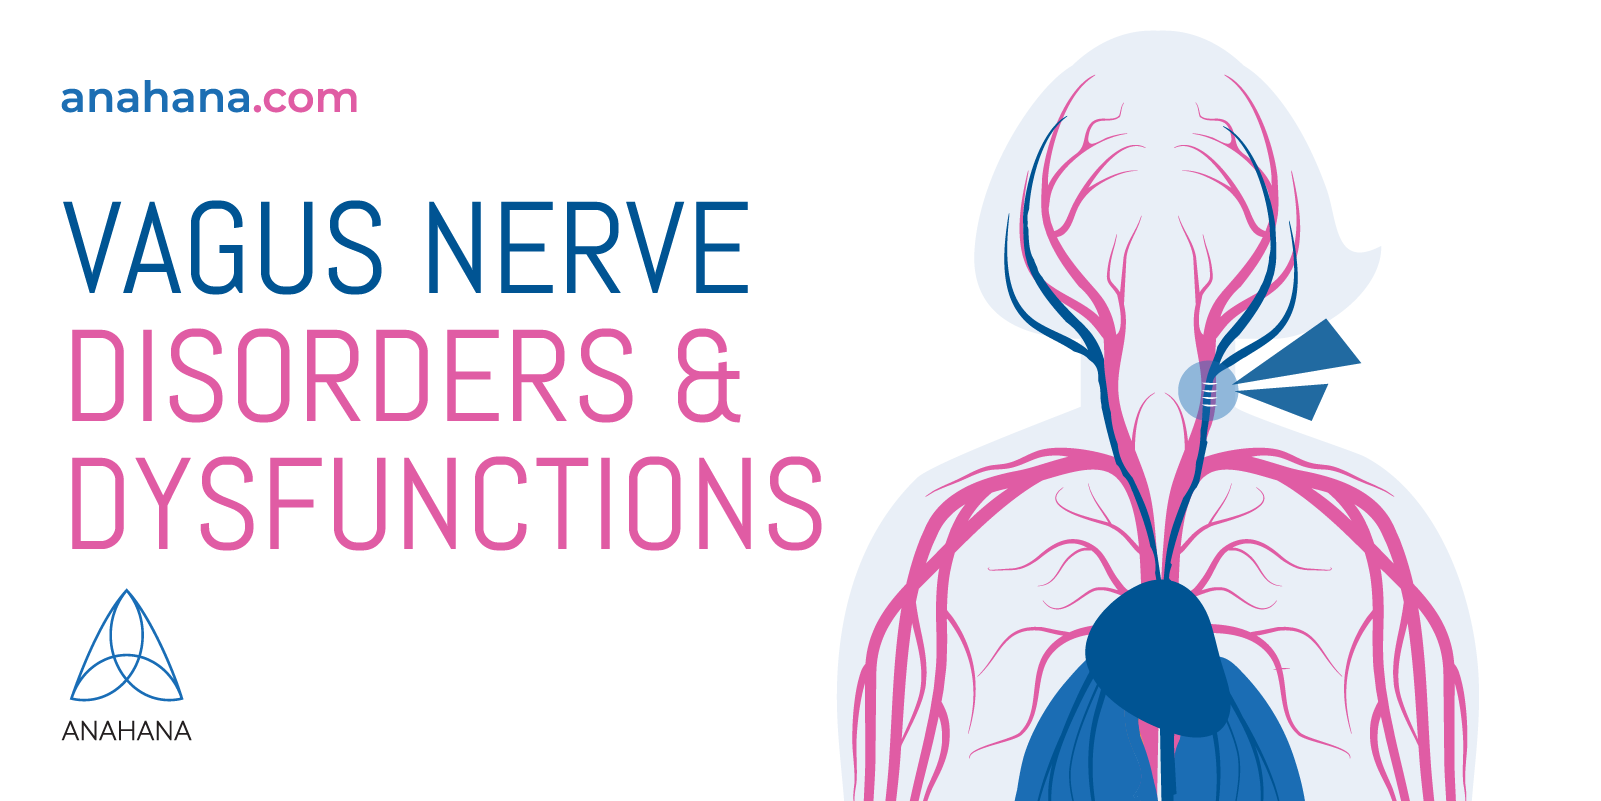 different vagus nerve disfunctions and disorders